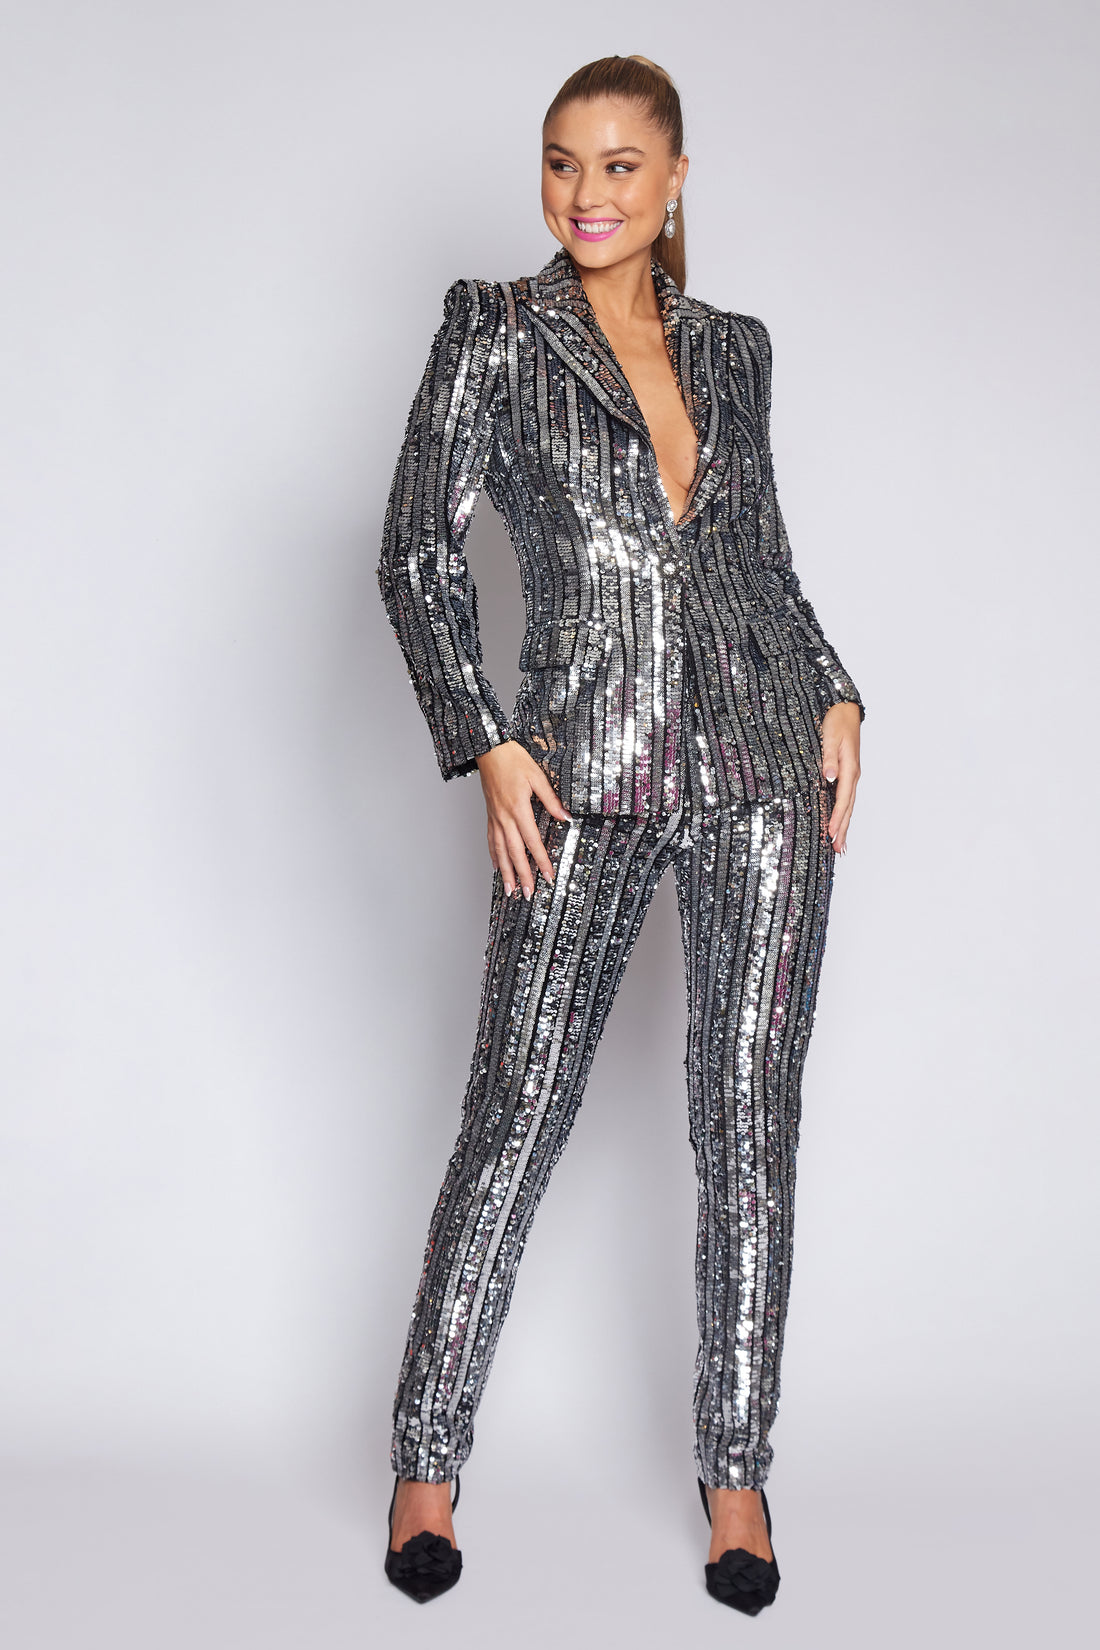 Black and Silver Sequin Suit